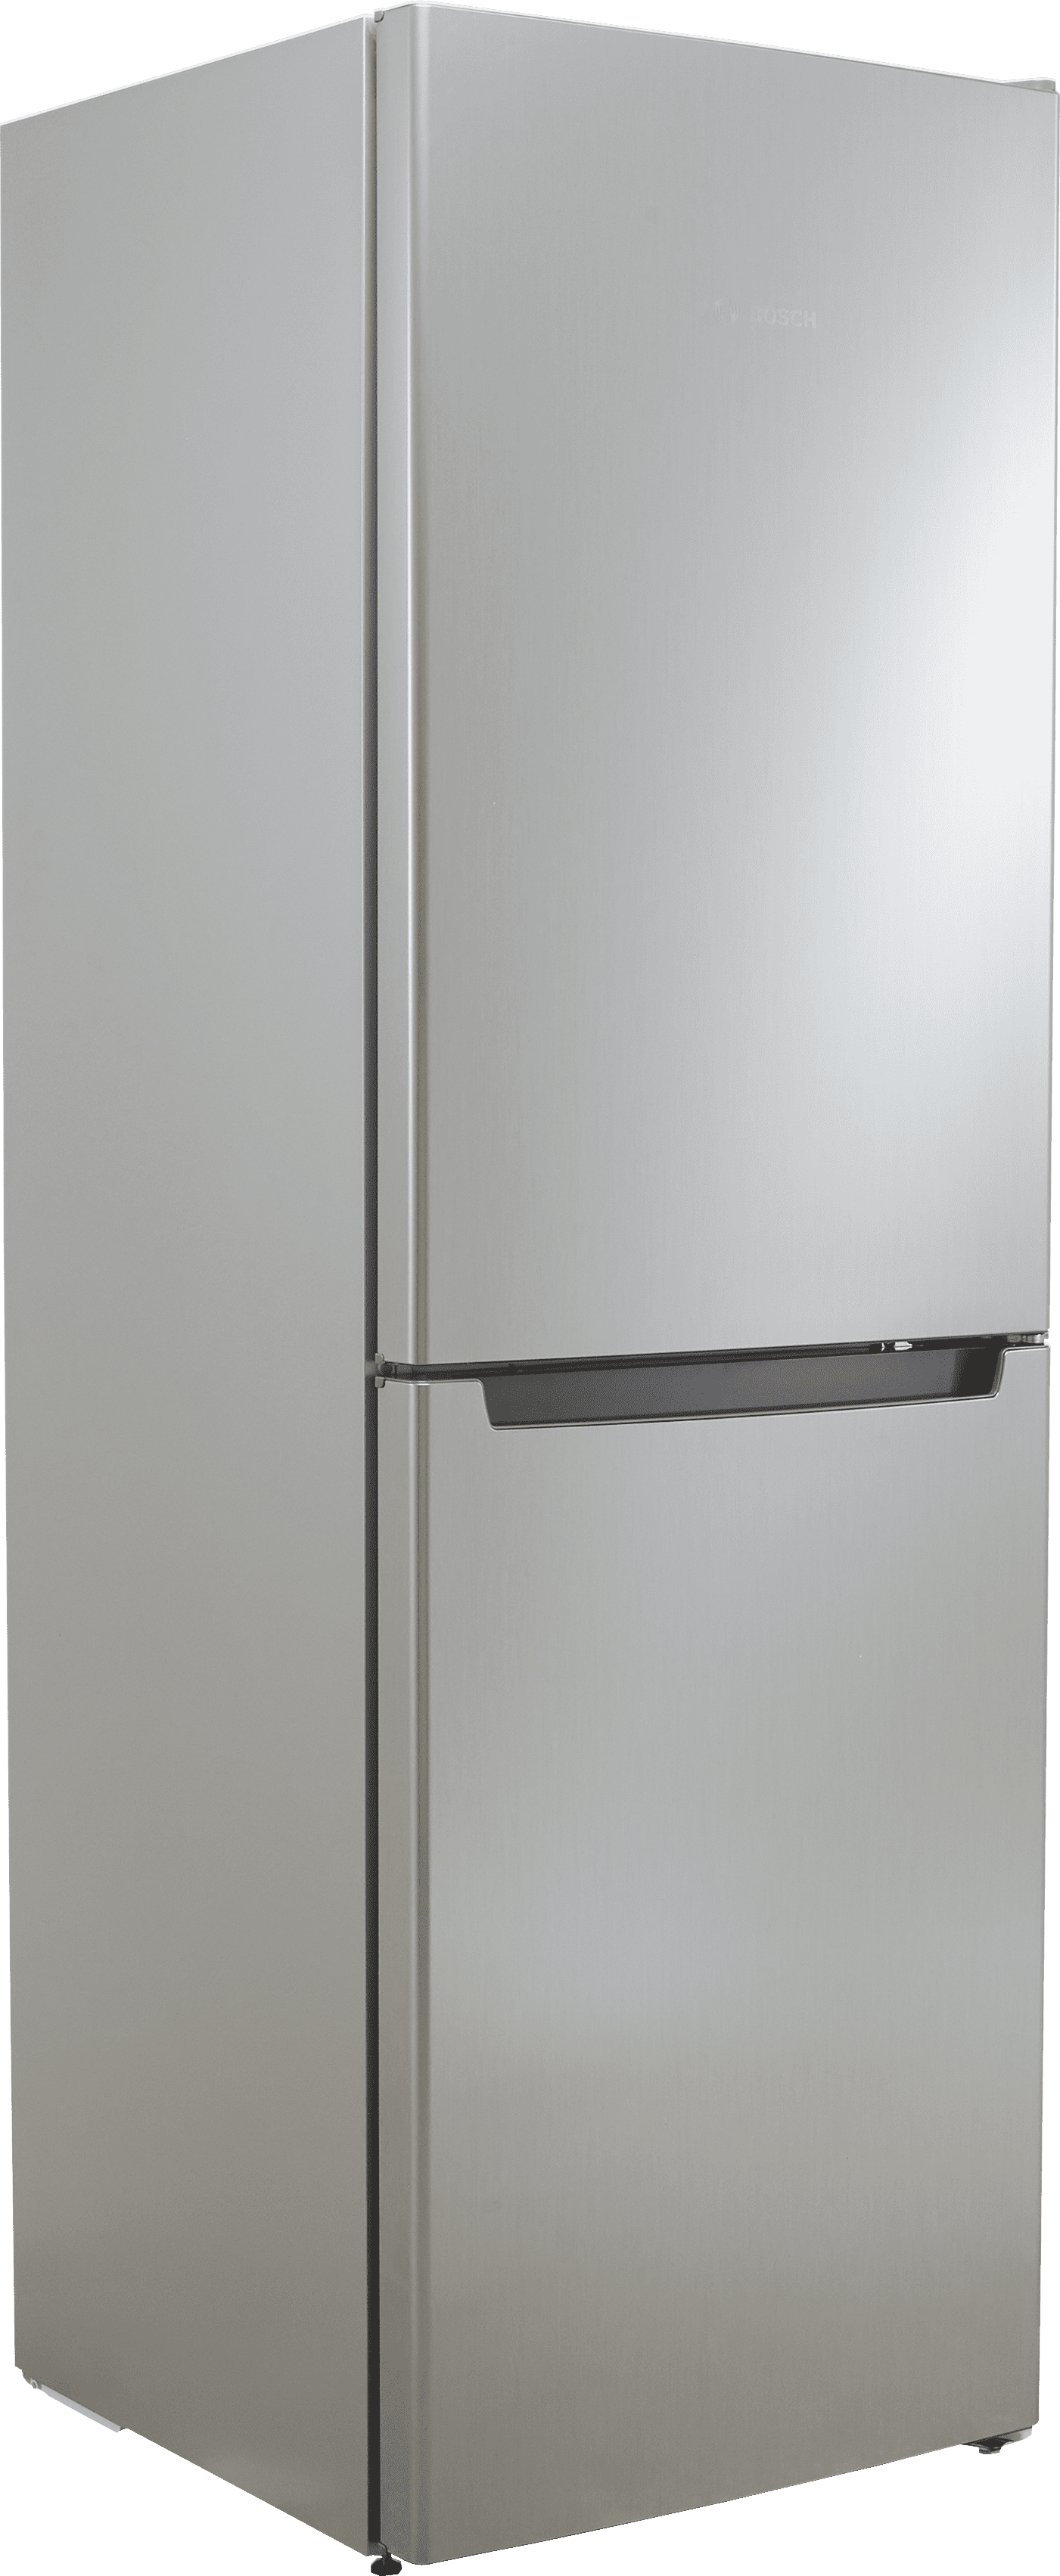 Bosch Series 2 KGN34NLEAG 50/50 No Frost Fridge Freezer - Stainless Steel Effect - E Rated, Stainless Steel